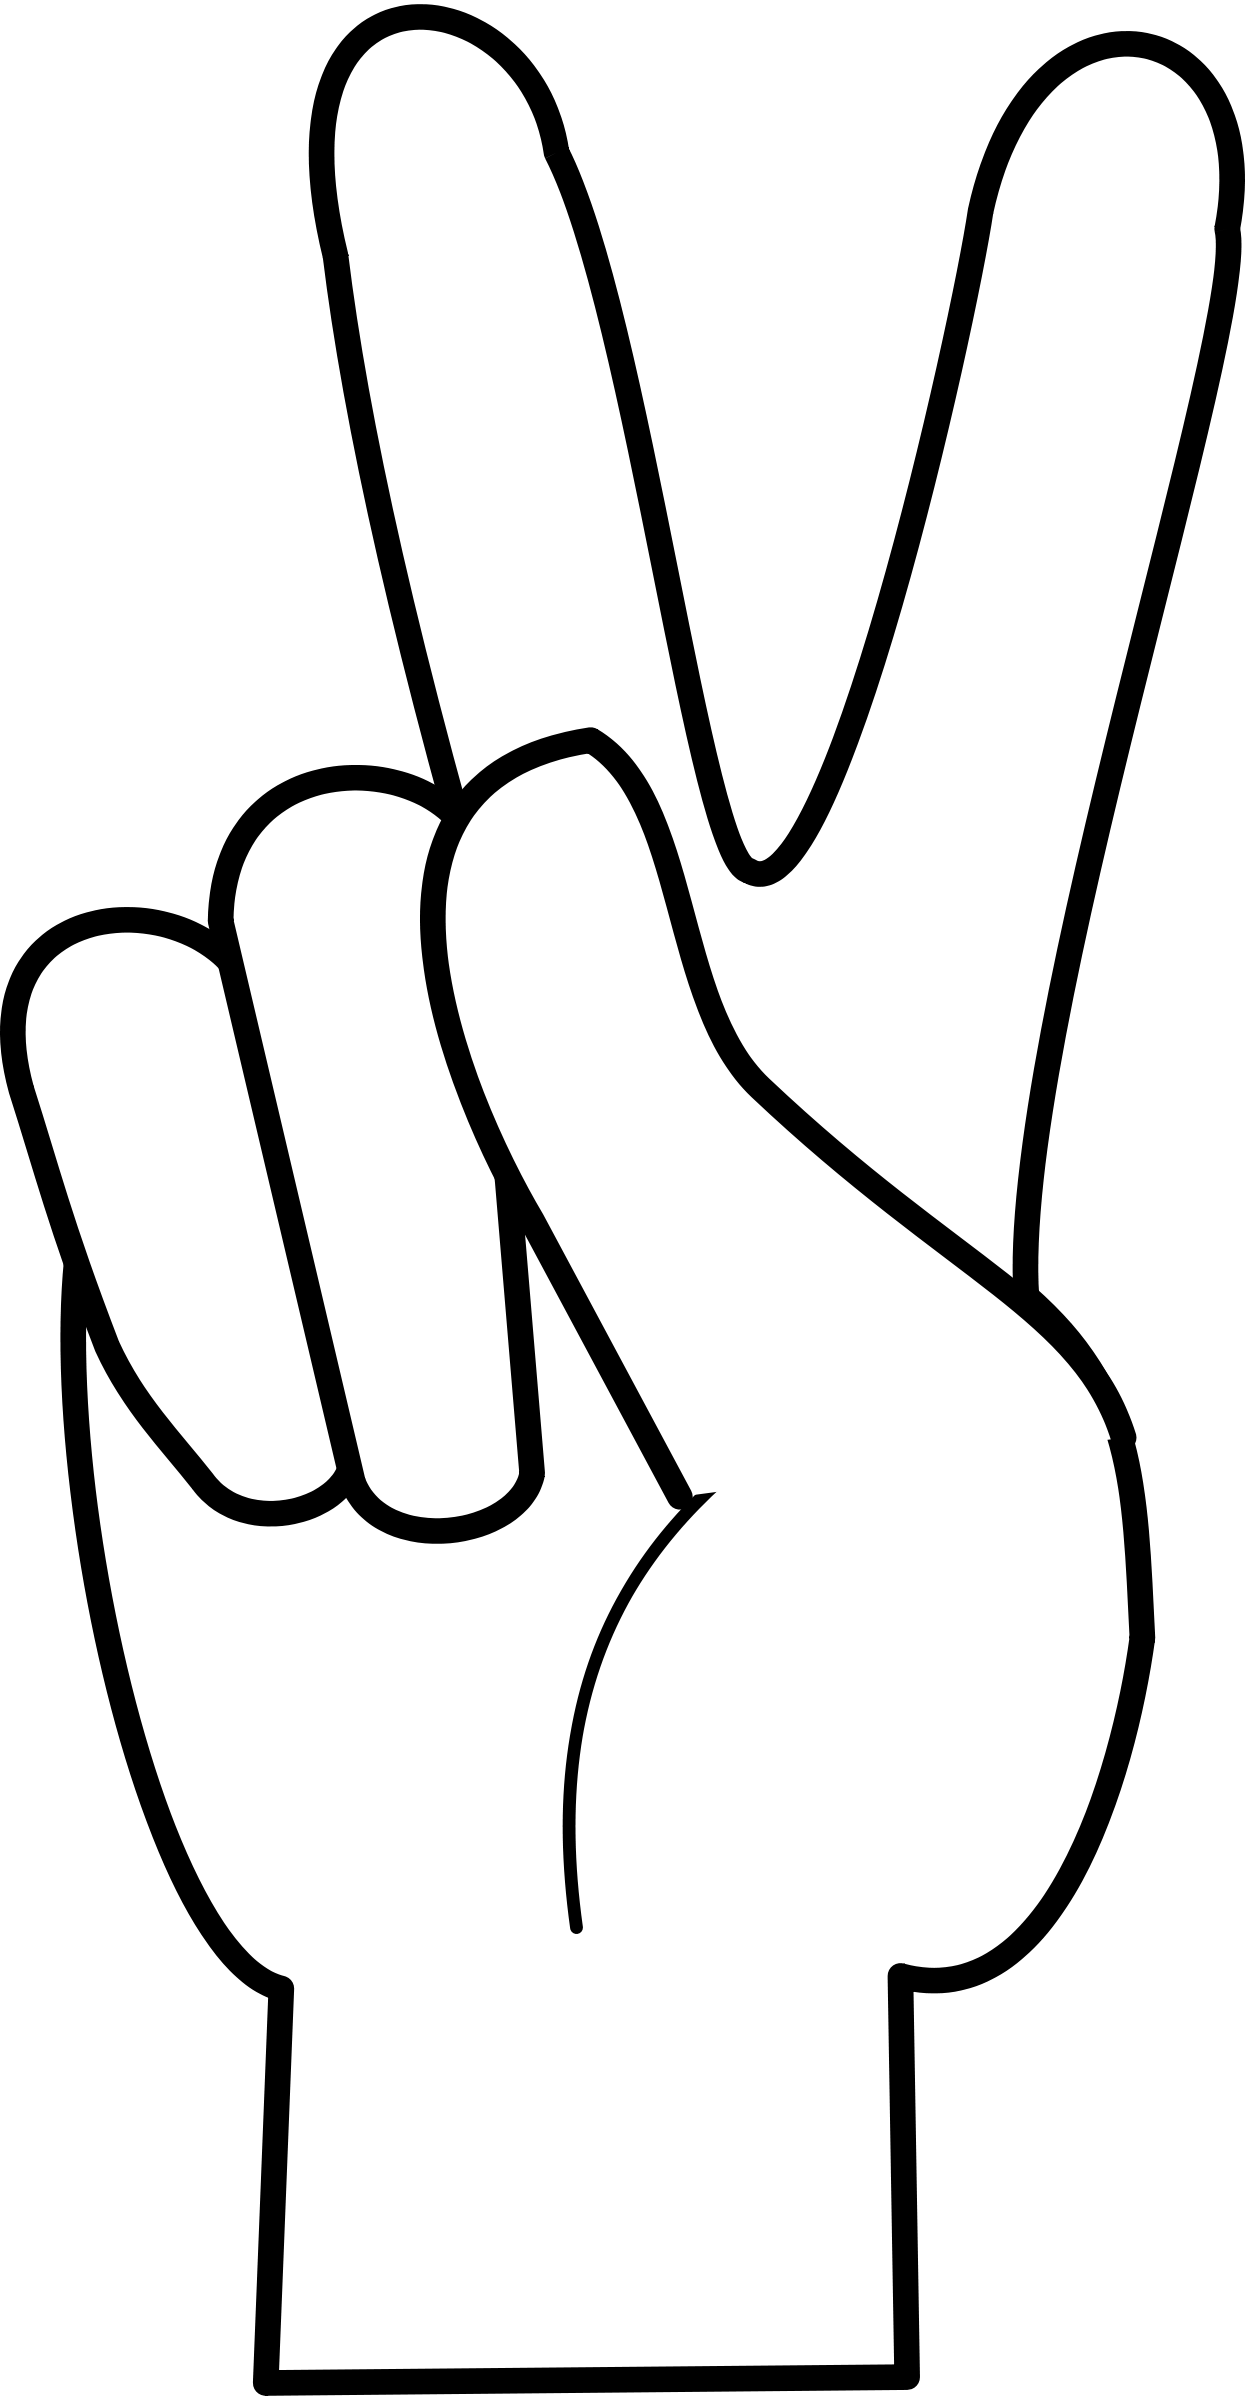 Images For > Peace Sign Fingers Cartoon